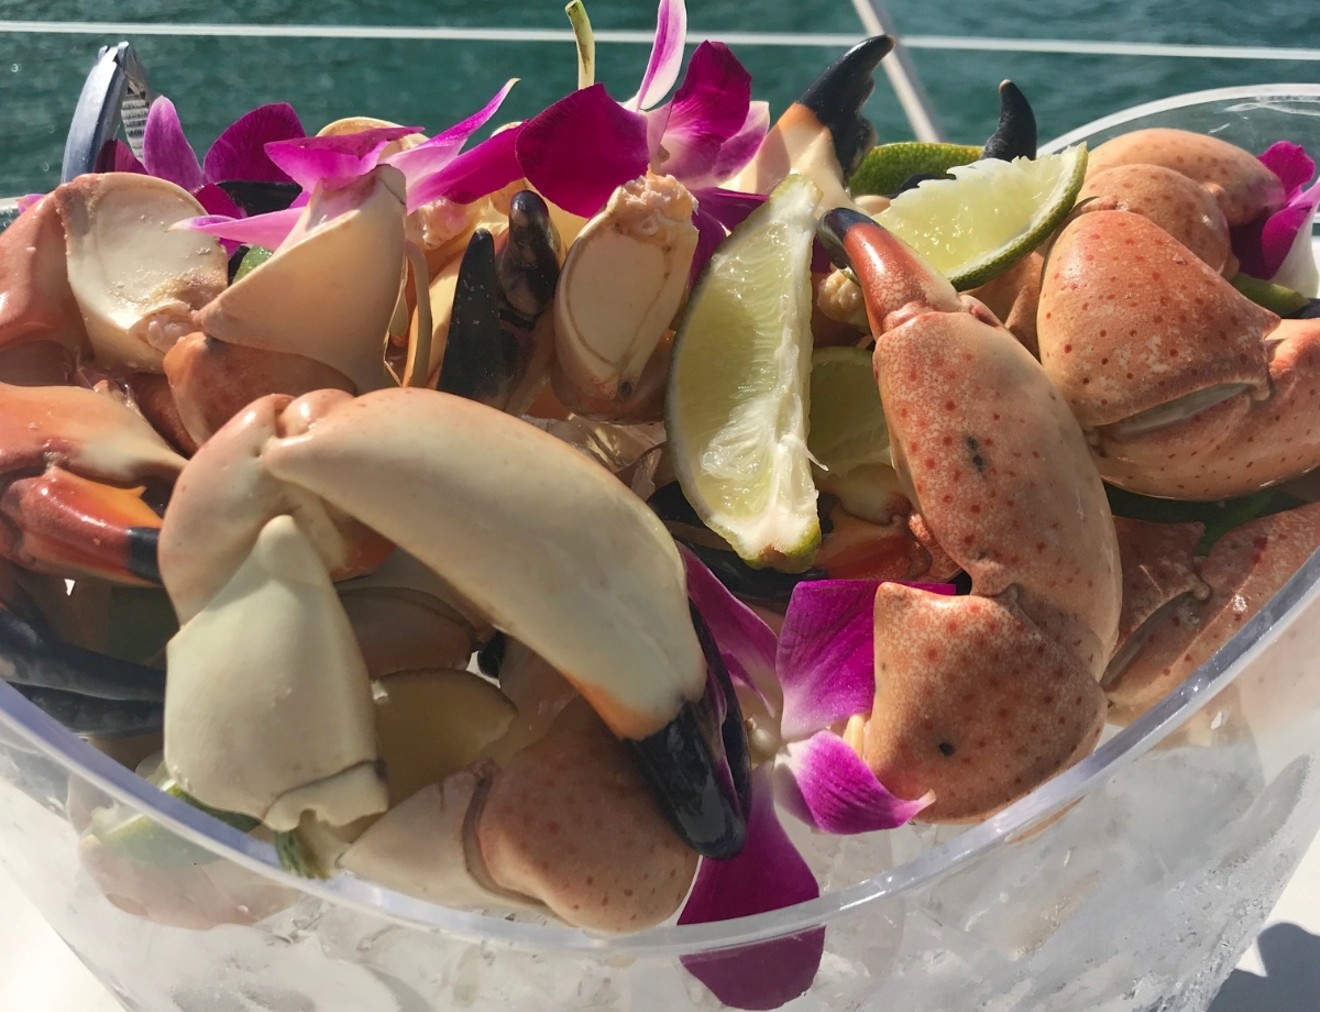 How can you tell if your stone crabs are fresh?